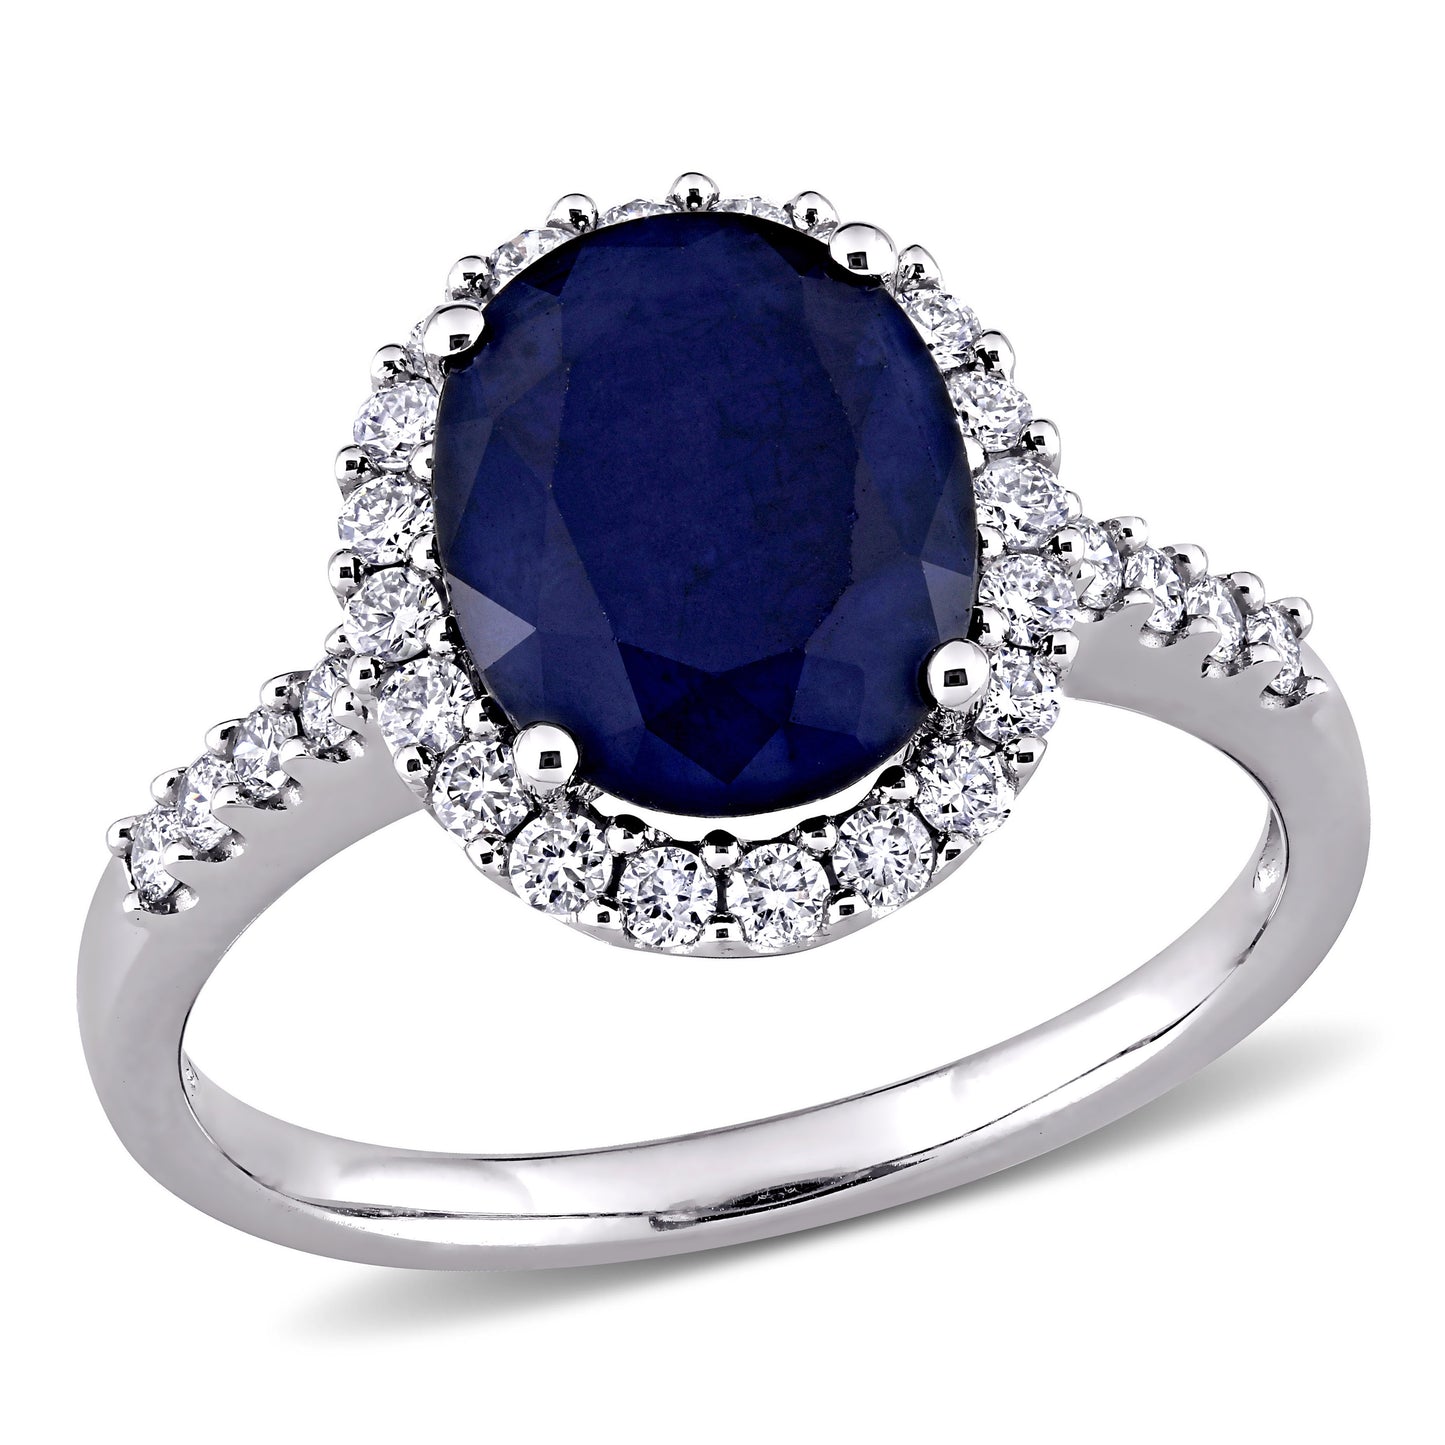 Oval Sapphire & Diamond Halo Ring in 14k White Gold